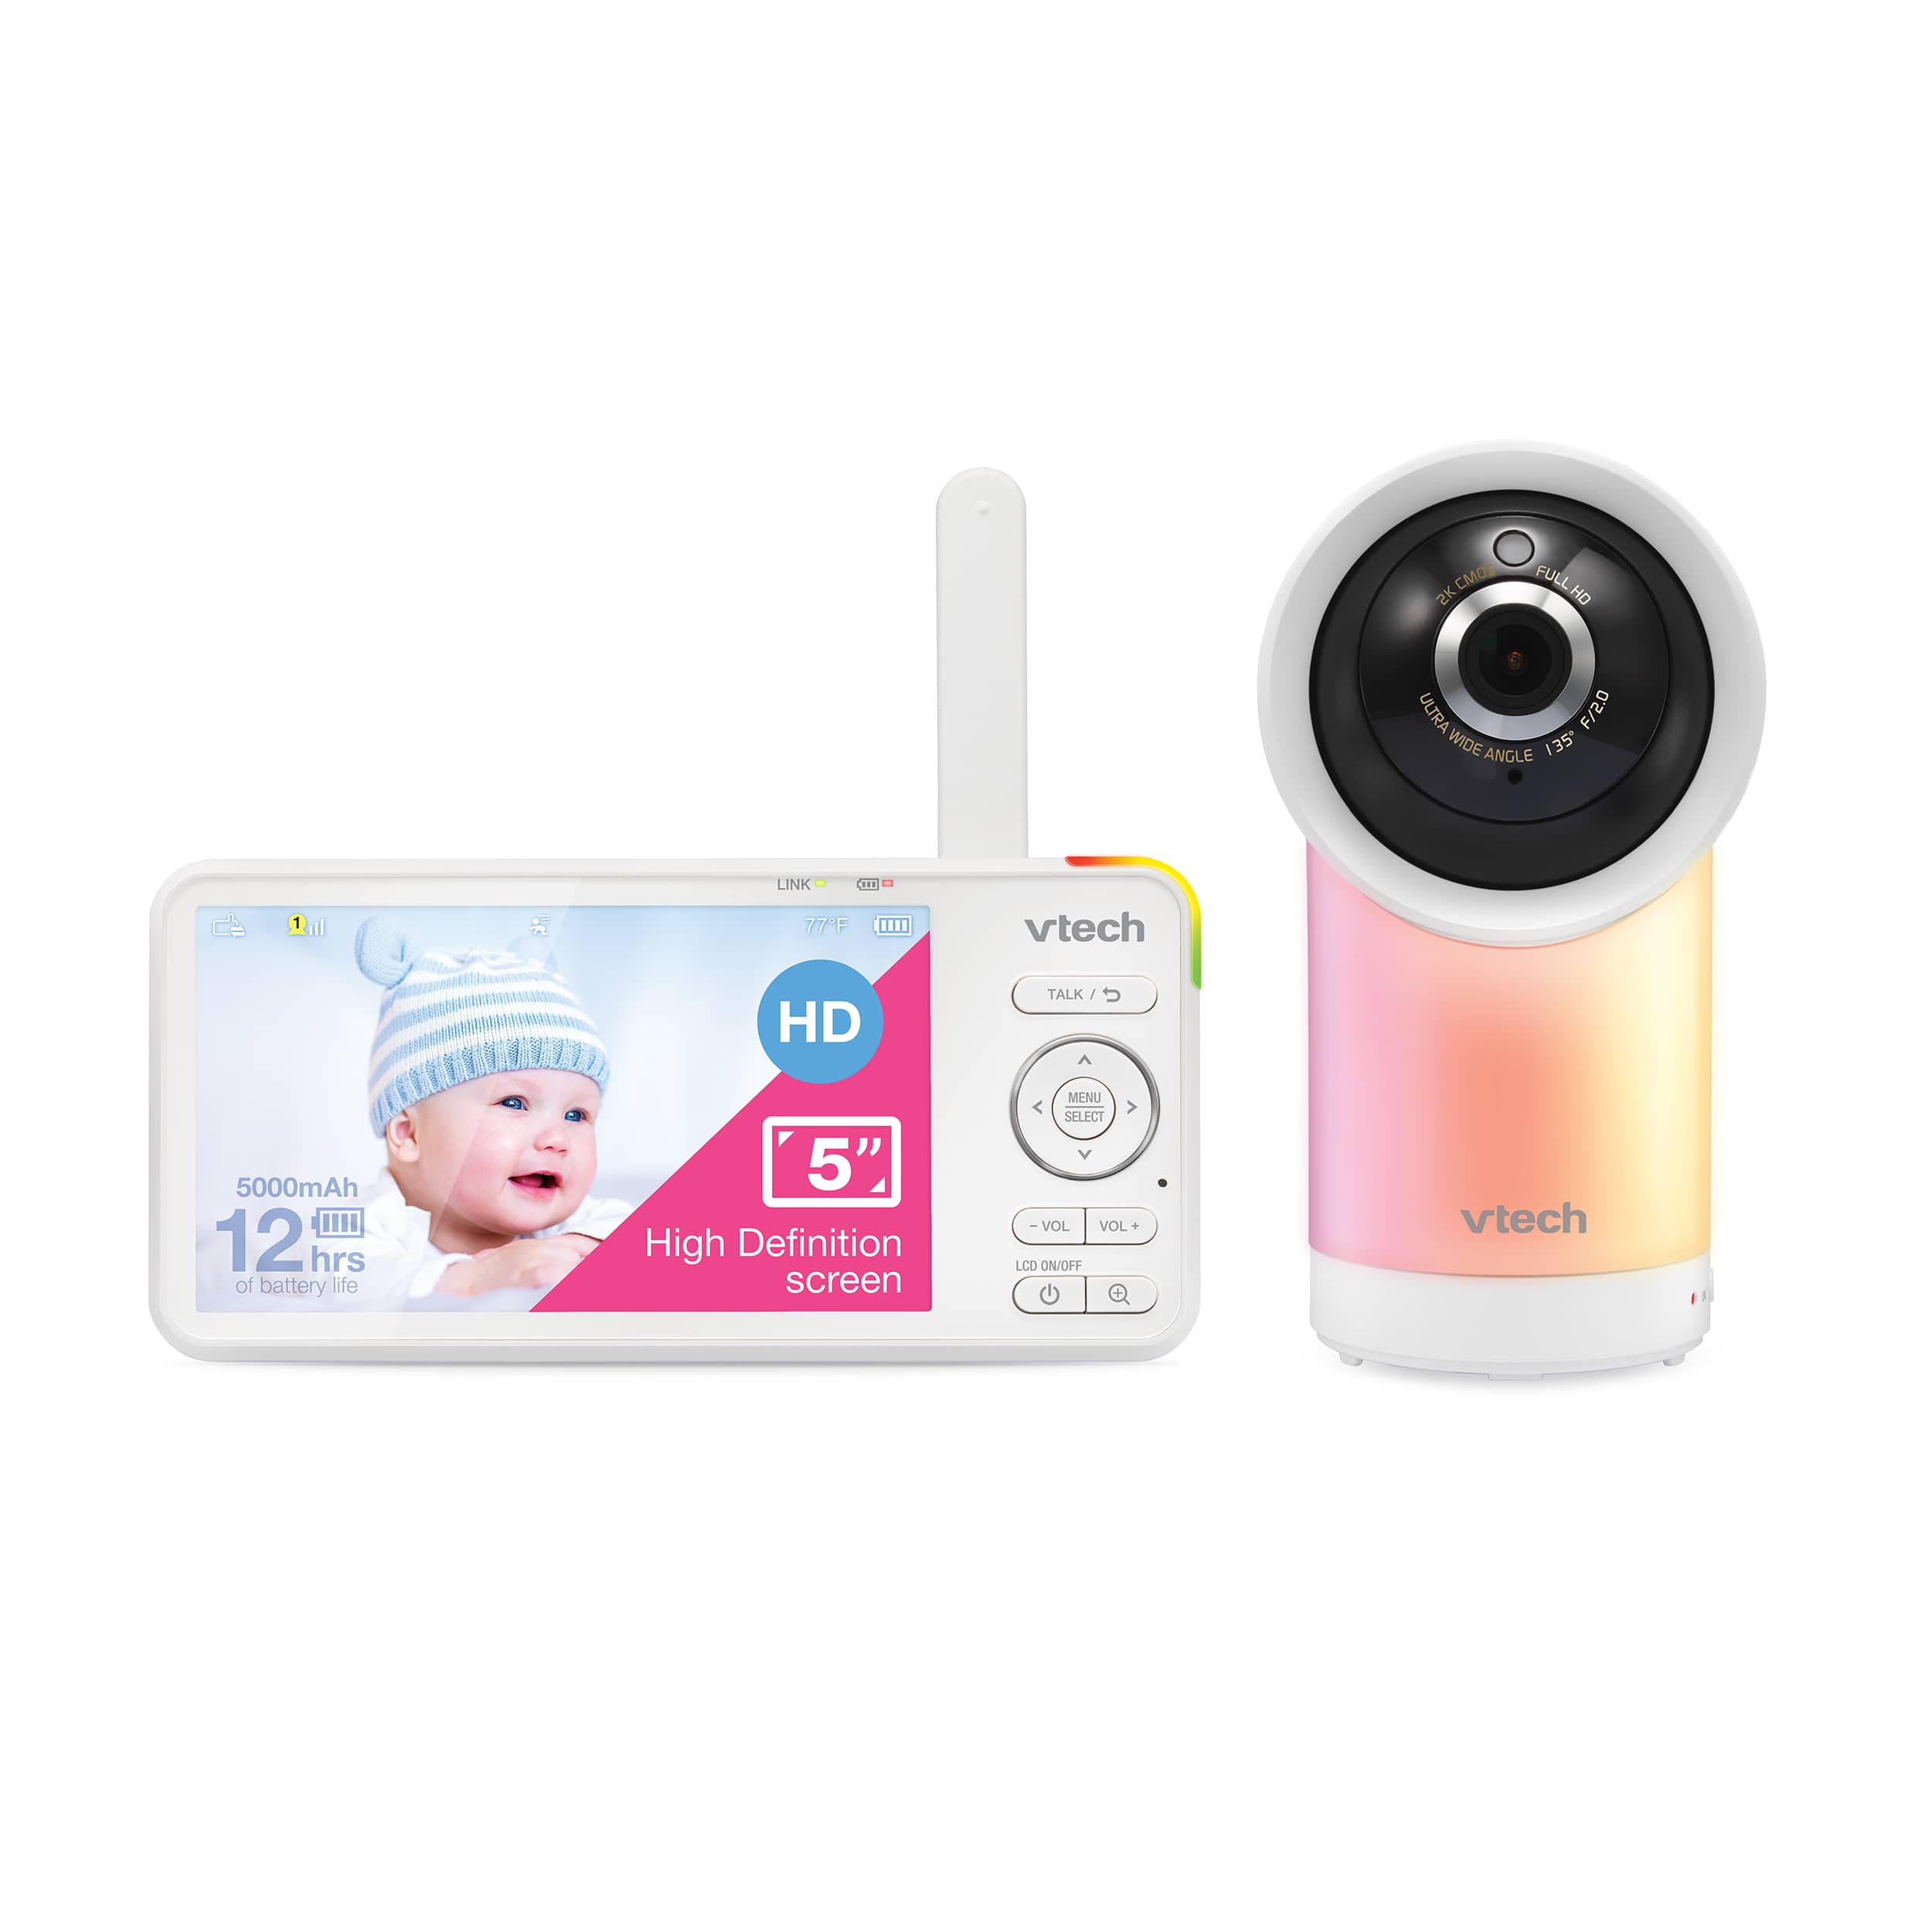 1080p Smart WiFi Remote Access 360 Degree Pan & Tilt Video Baby Monitor with 5" High Definition 720p Display, Night Light - view 1